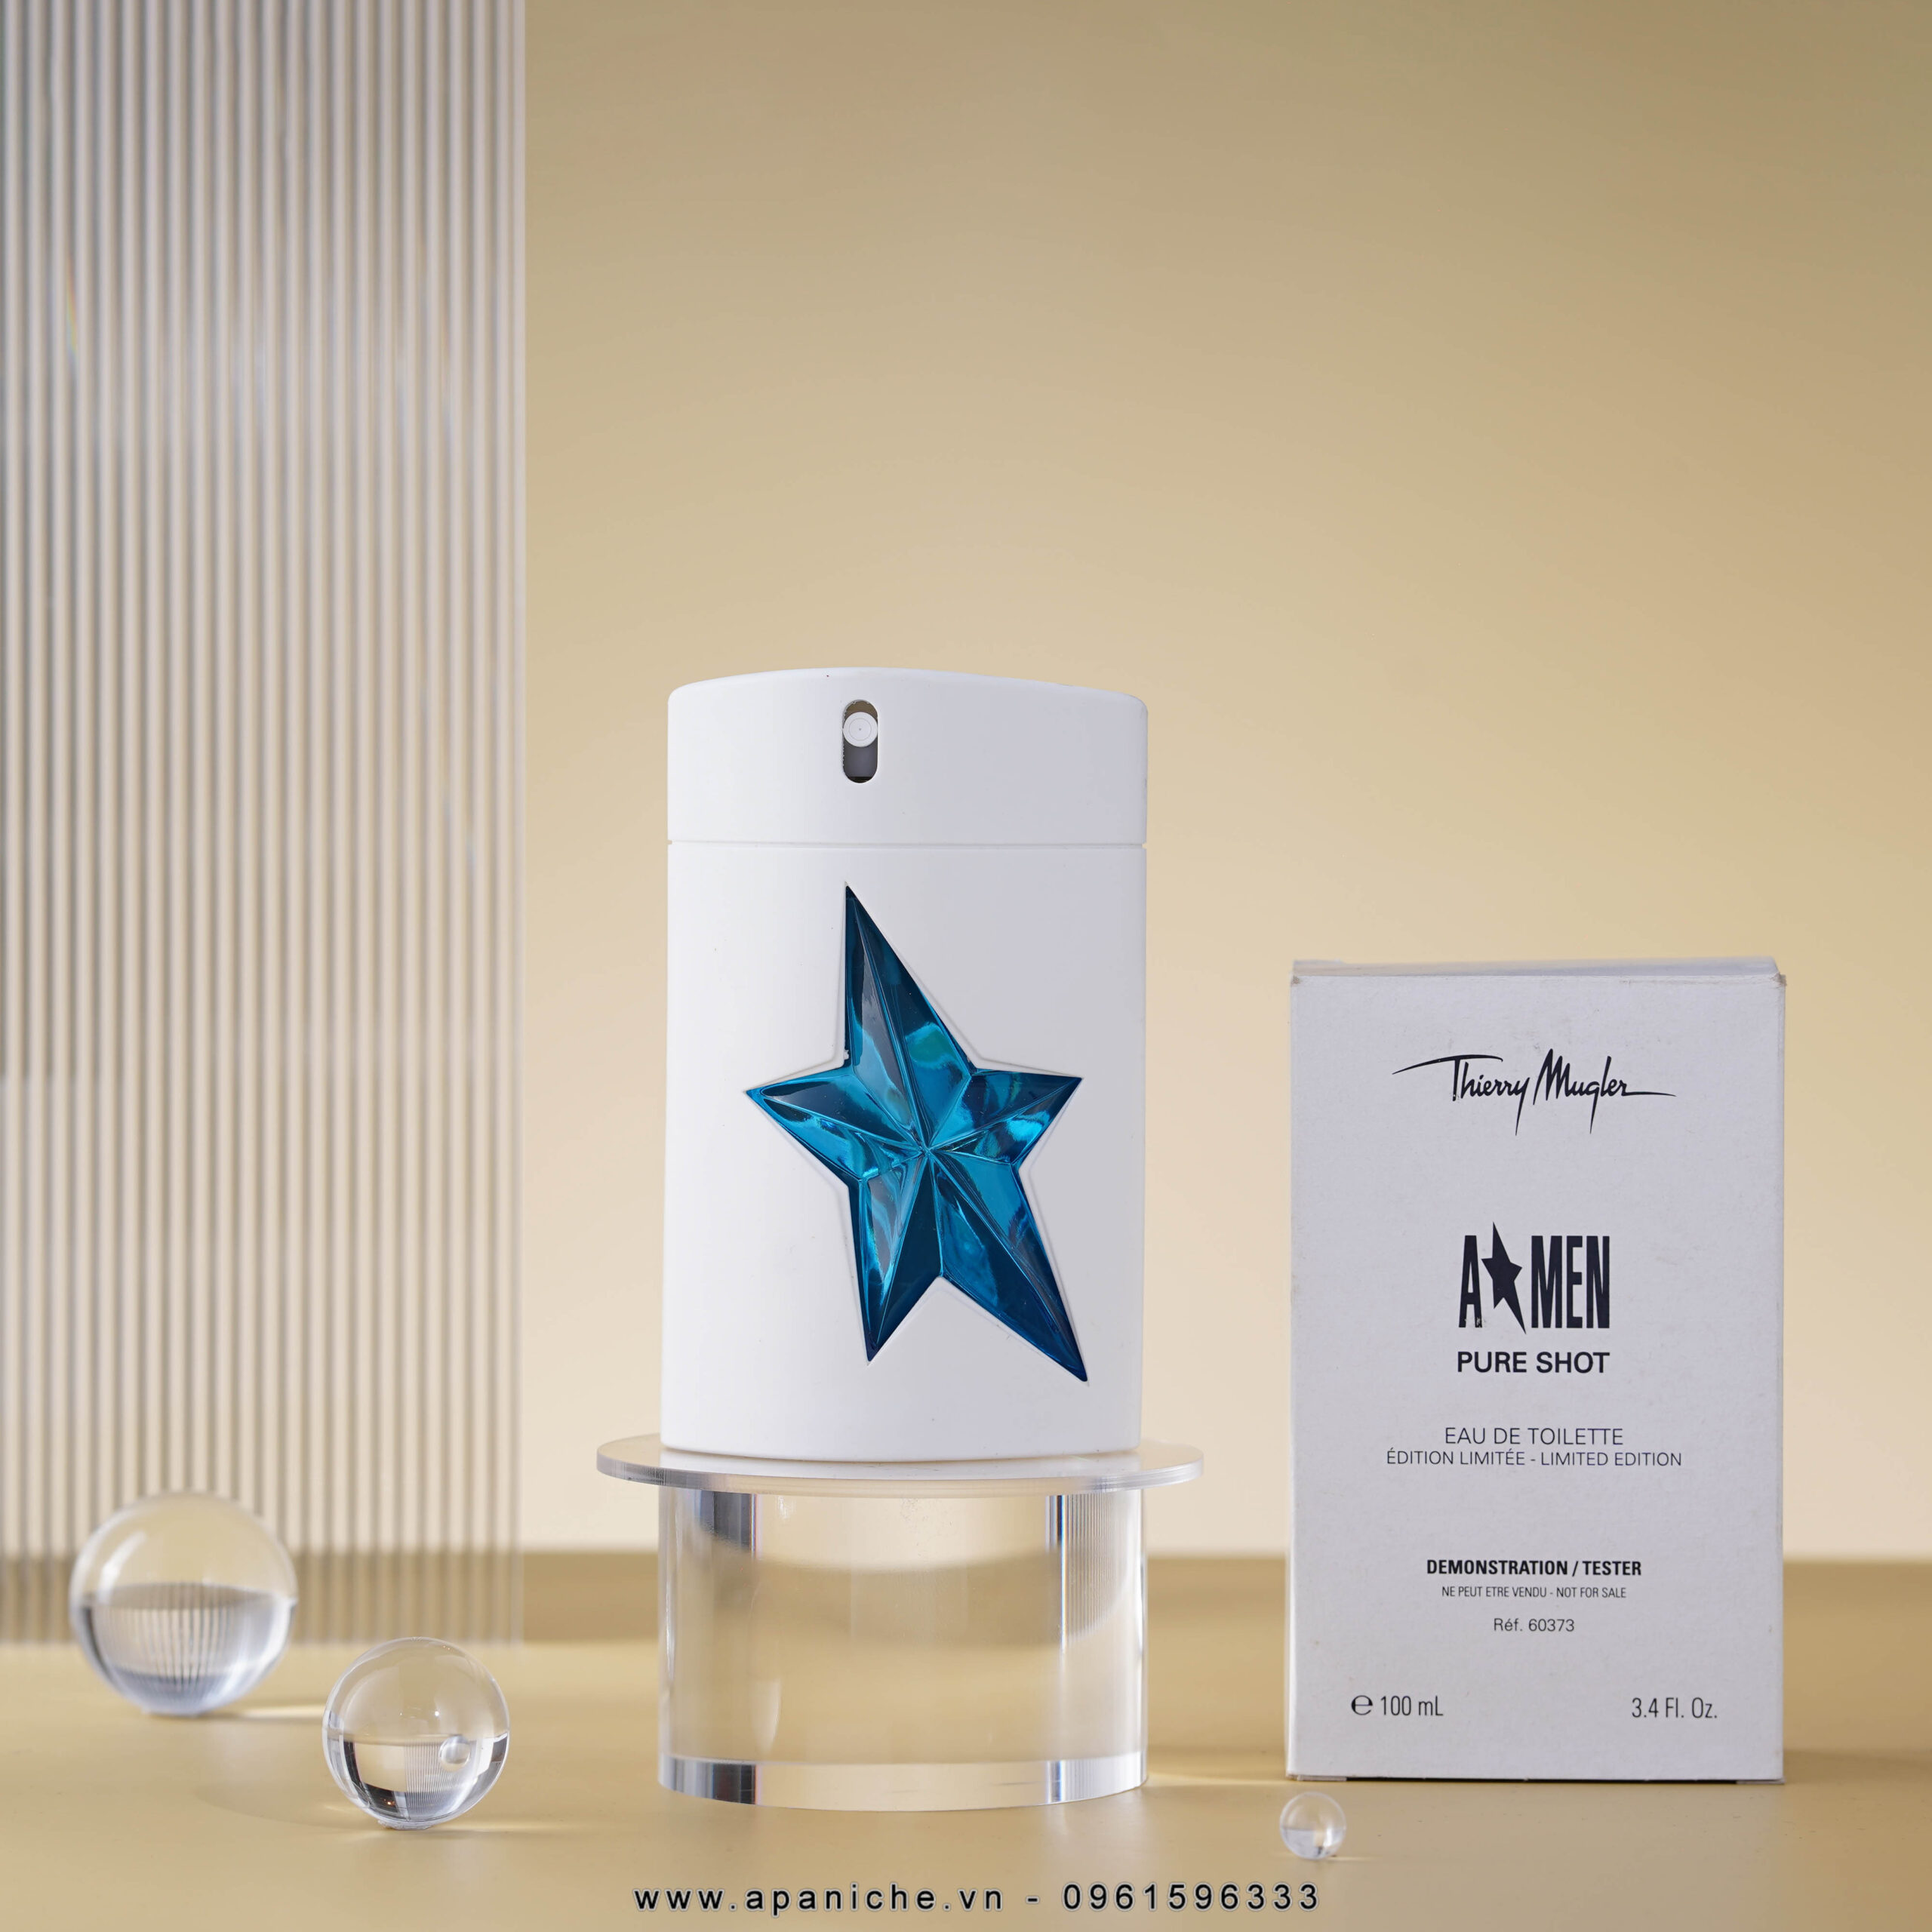 Thierry-Mugler-A-Men-Pure-Shot-Limited-EDT-tester